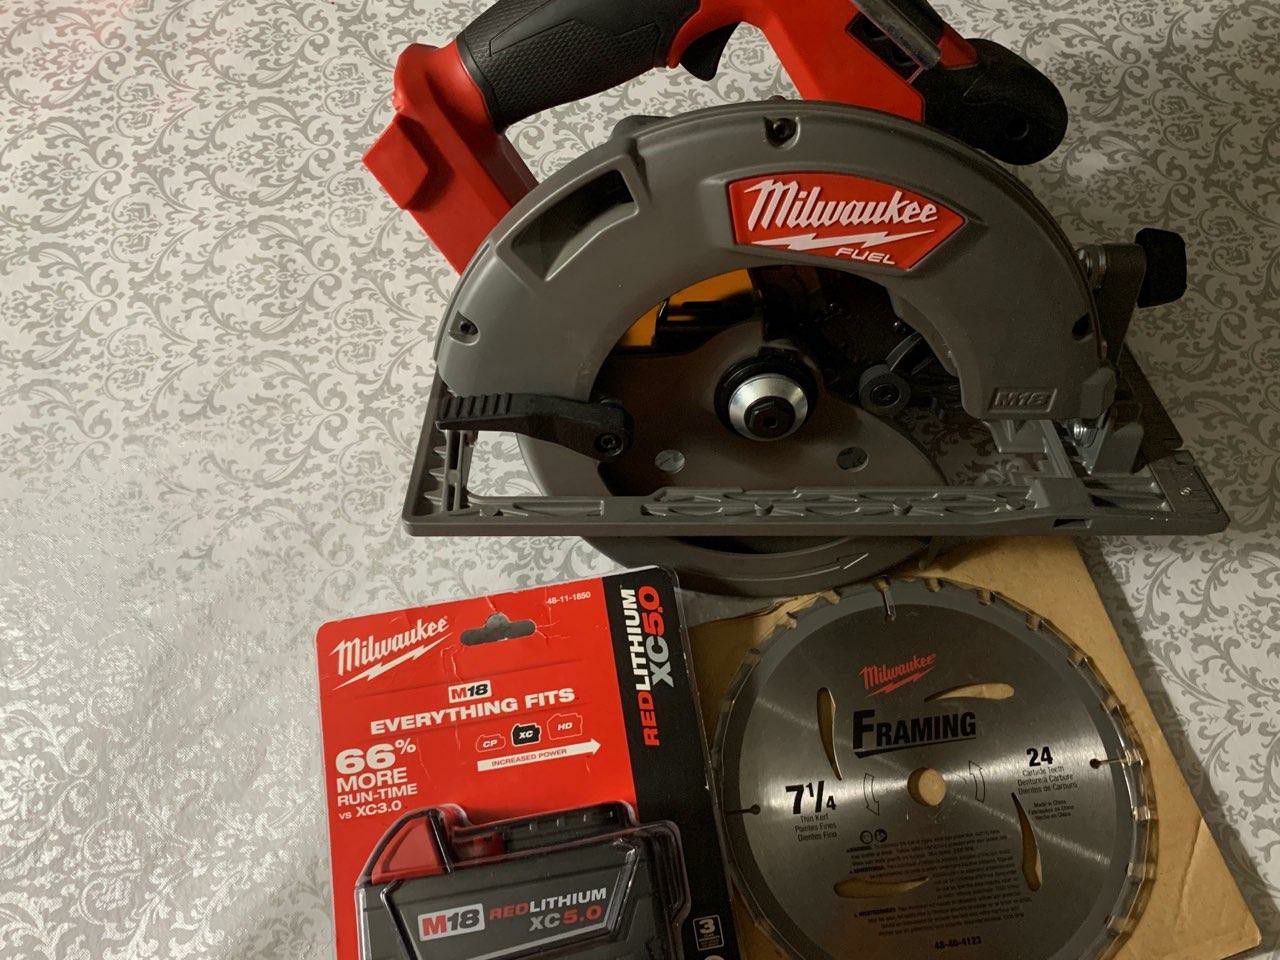 Circular saw 7 1/4 with battery